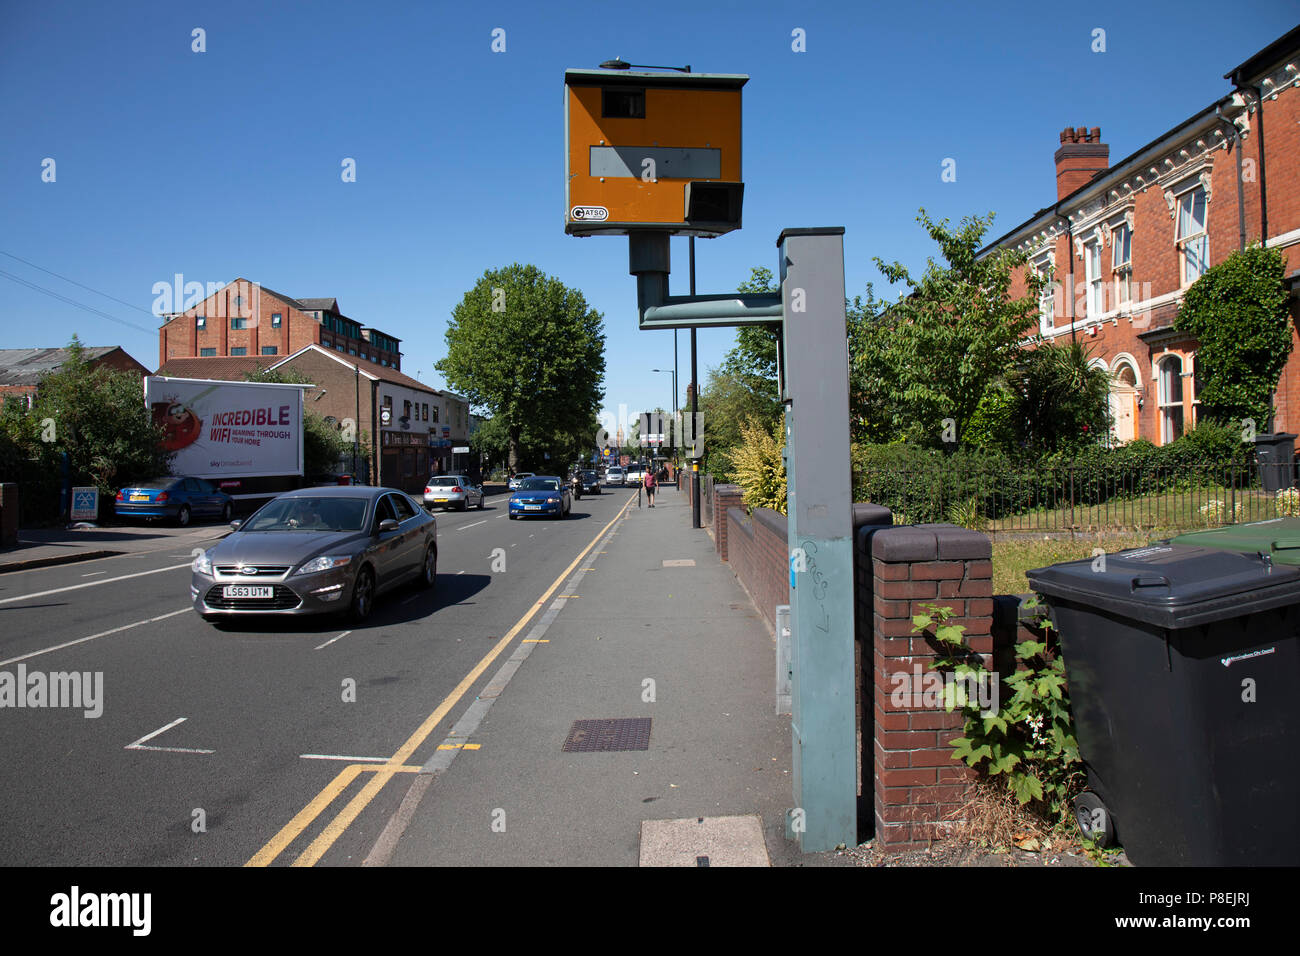 Speed camera on Moseley Road in Birmingham, United Kingdom. A traffic enforcement camera is a camera which may be mounted beside or over a road or installed in an enforcement vehicle to detect traffic regulation violations, including speeding. Stock Photo